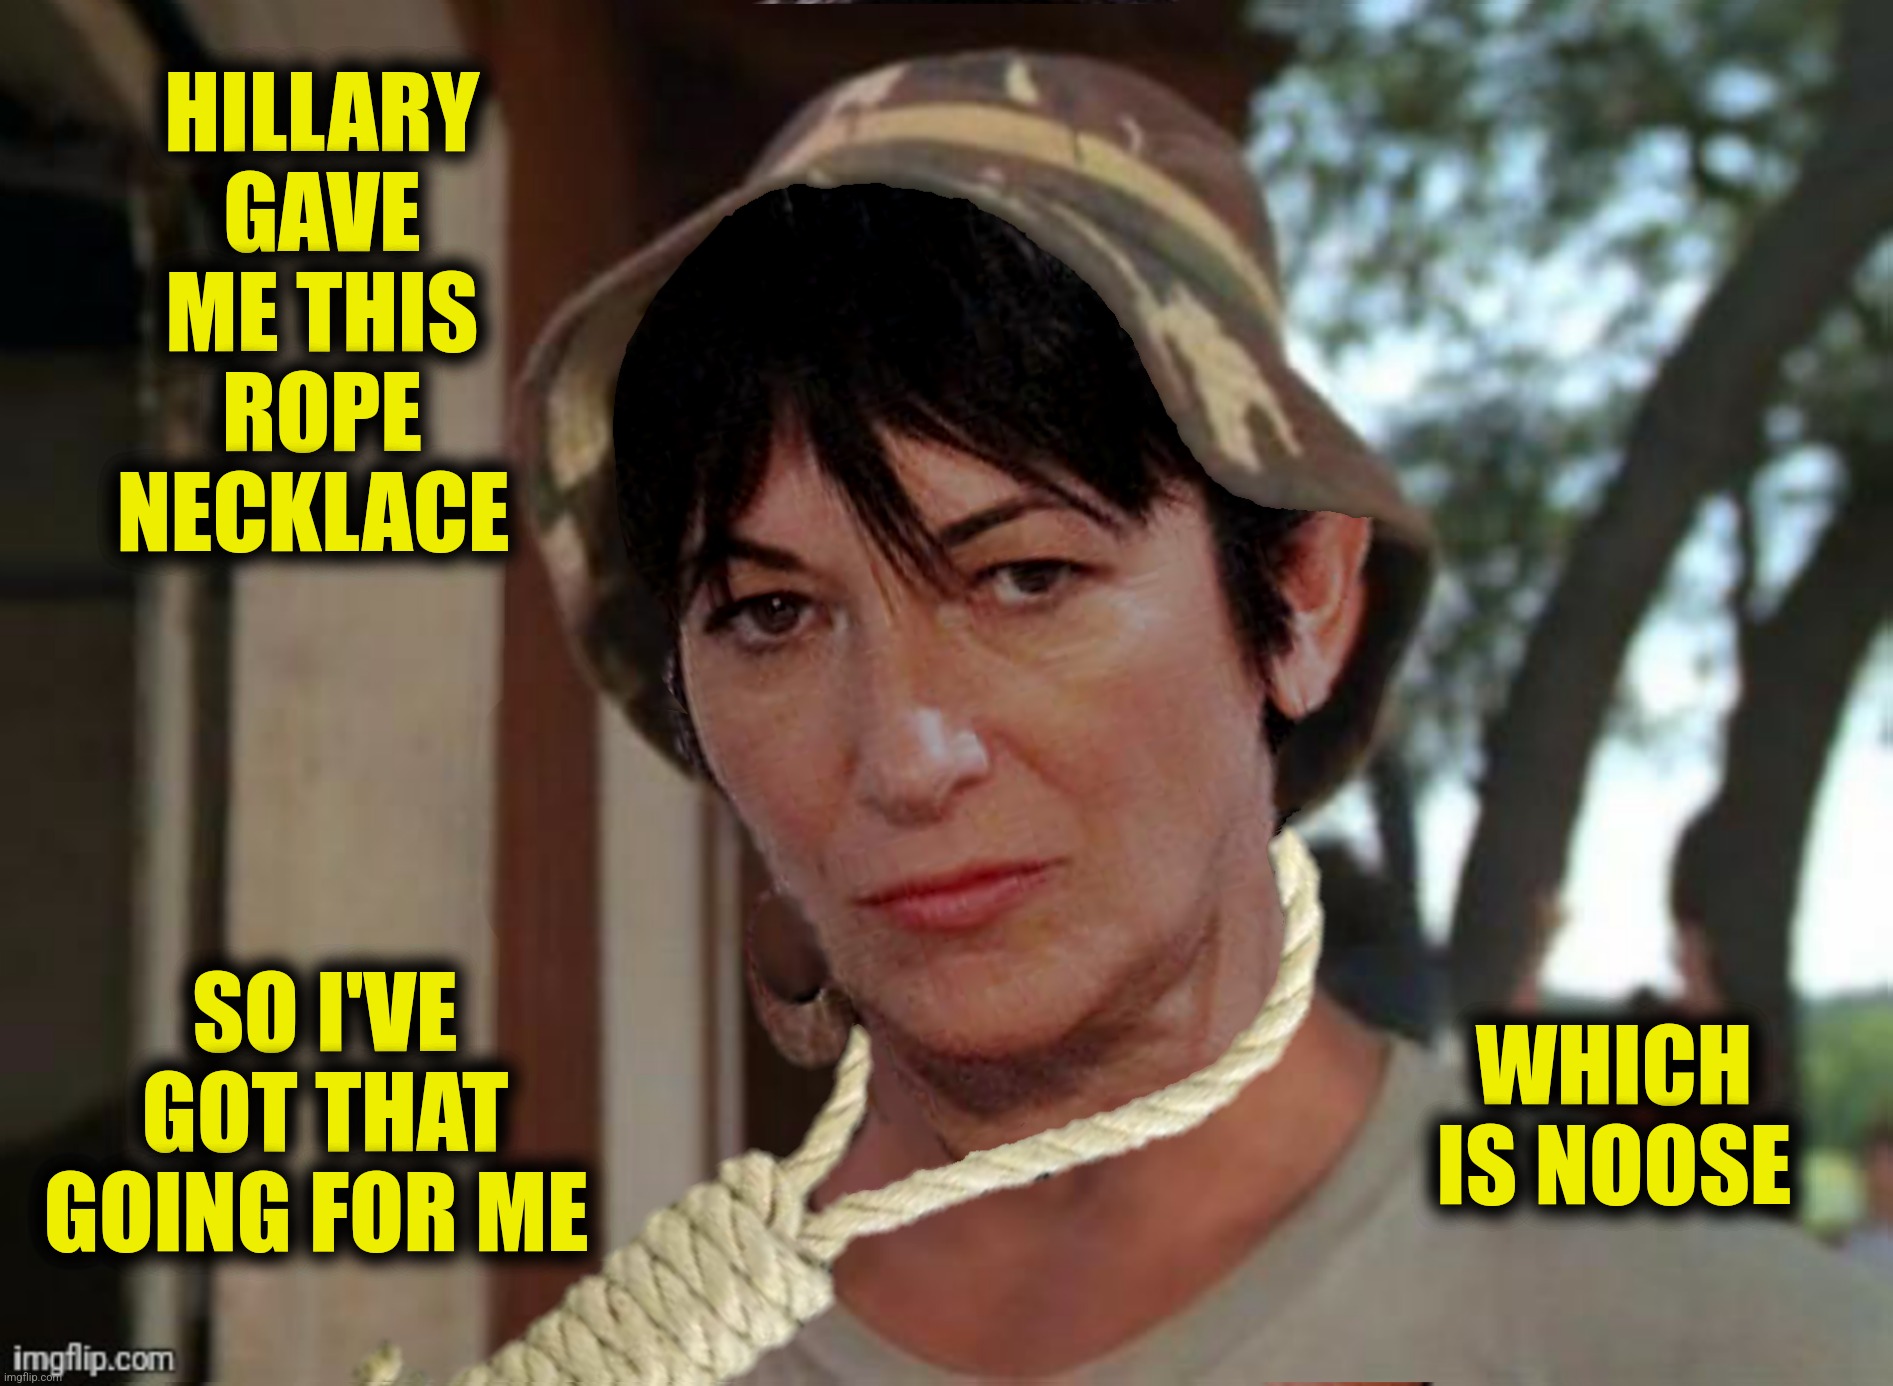 HILLARY GAVE ME THIS ROPE NECKLACE SO I'VE GOT THAT GOING FOR ME WHICH IS NOOSE | made w/ Imgflip meme maker